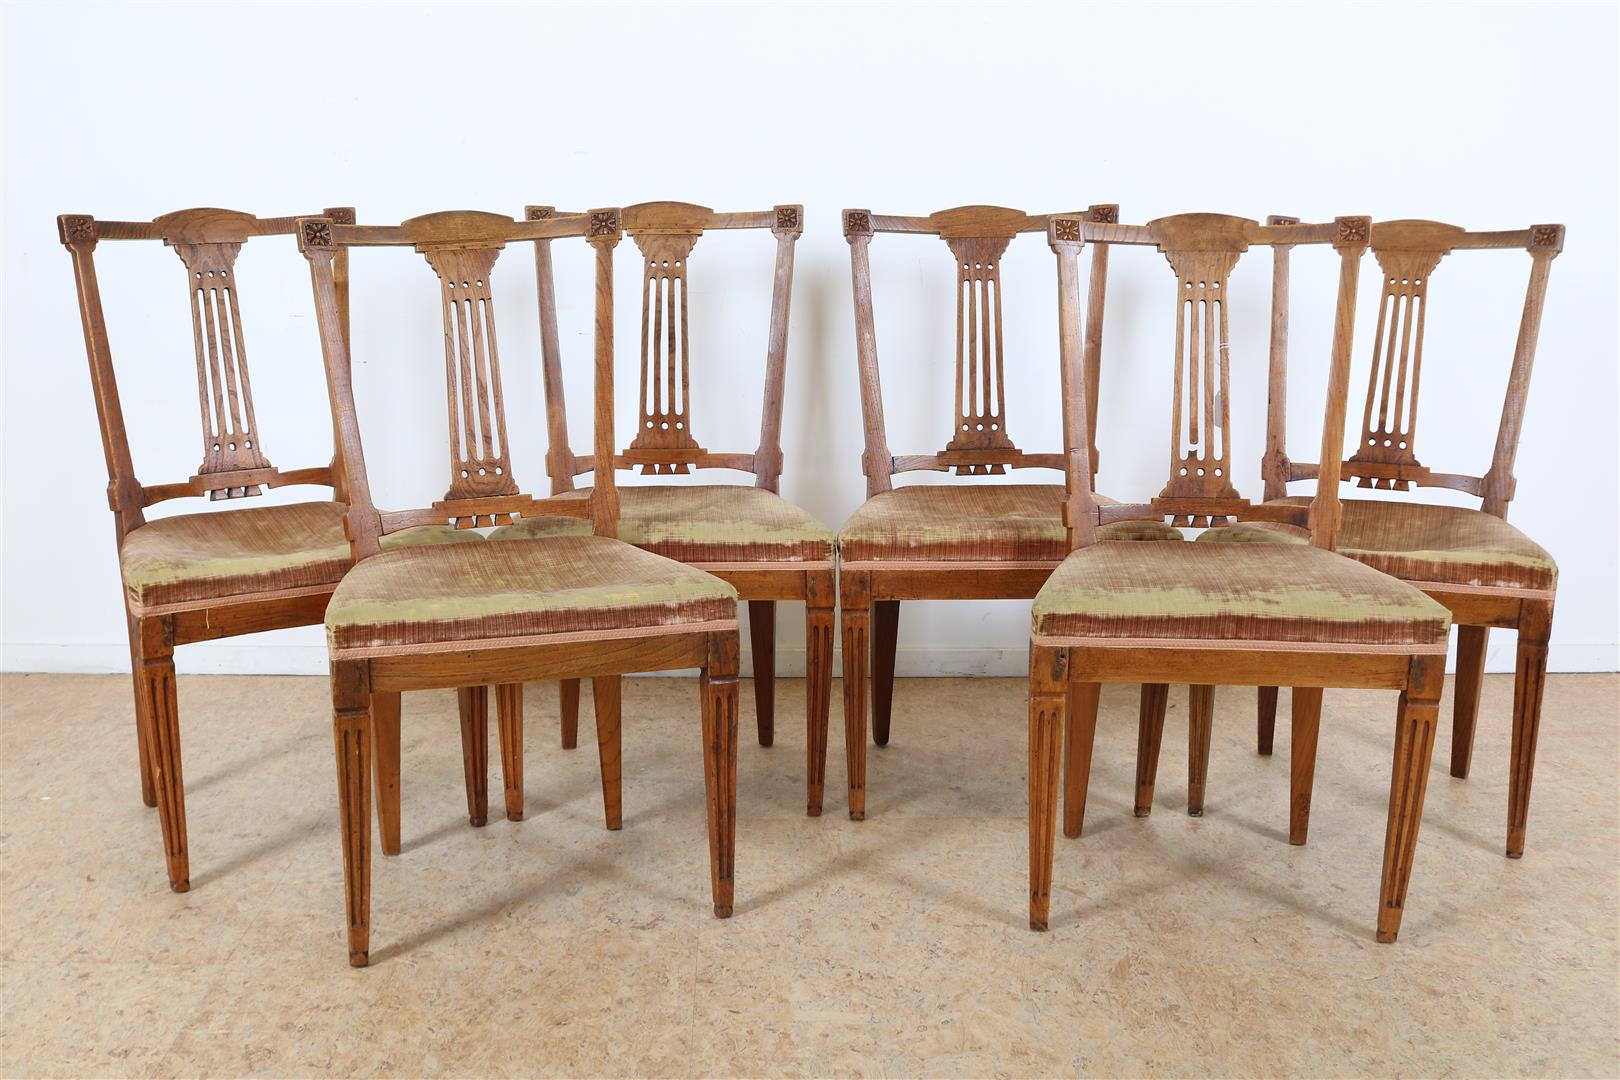 Series of 6 elm wood chairs with elaborate backrest and various green velvet seats, ca. 1800. (